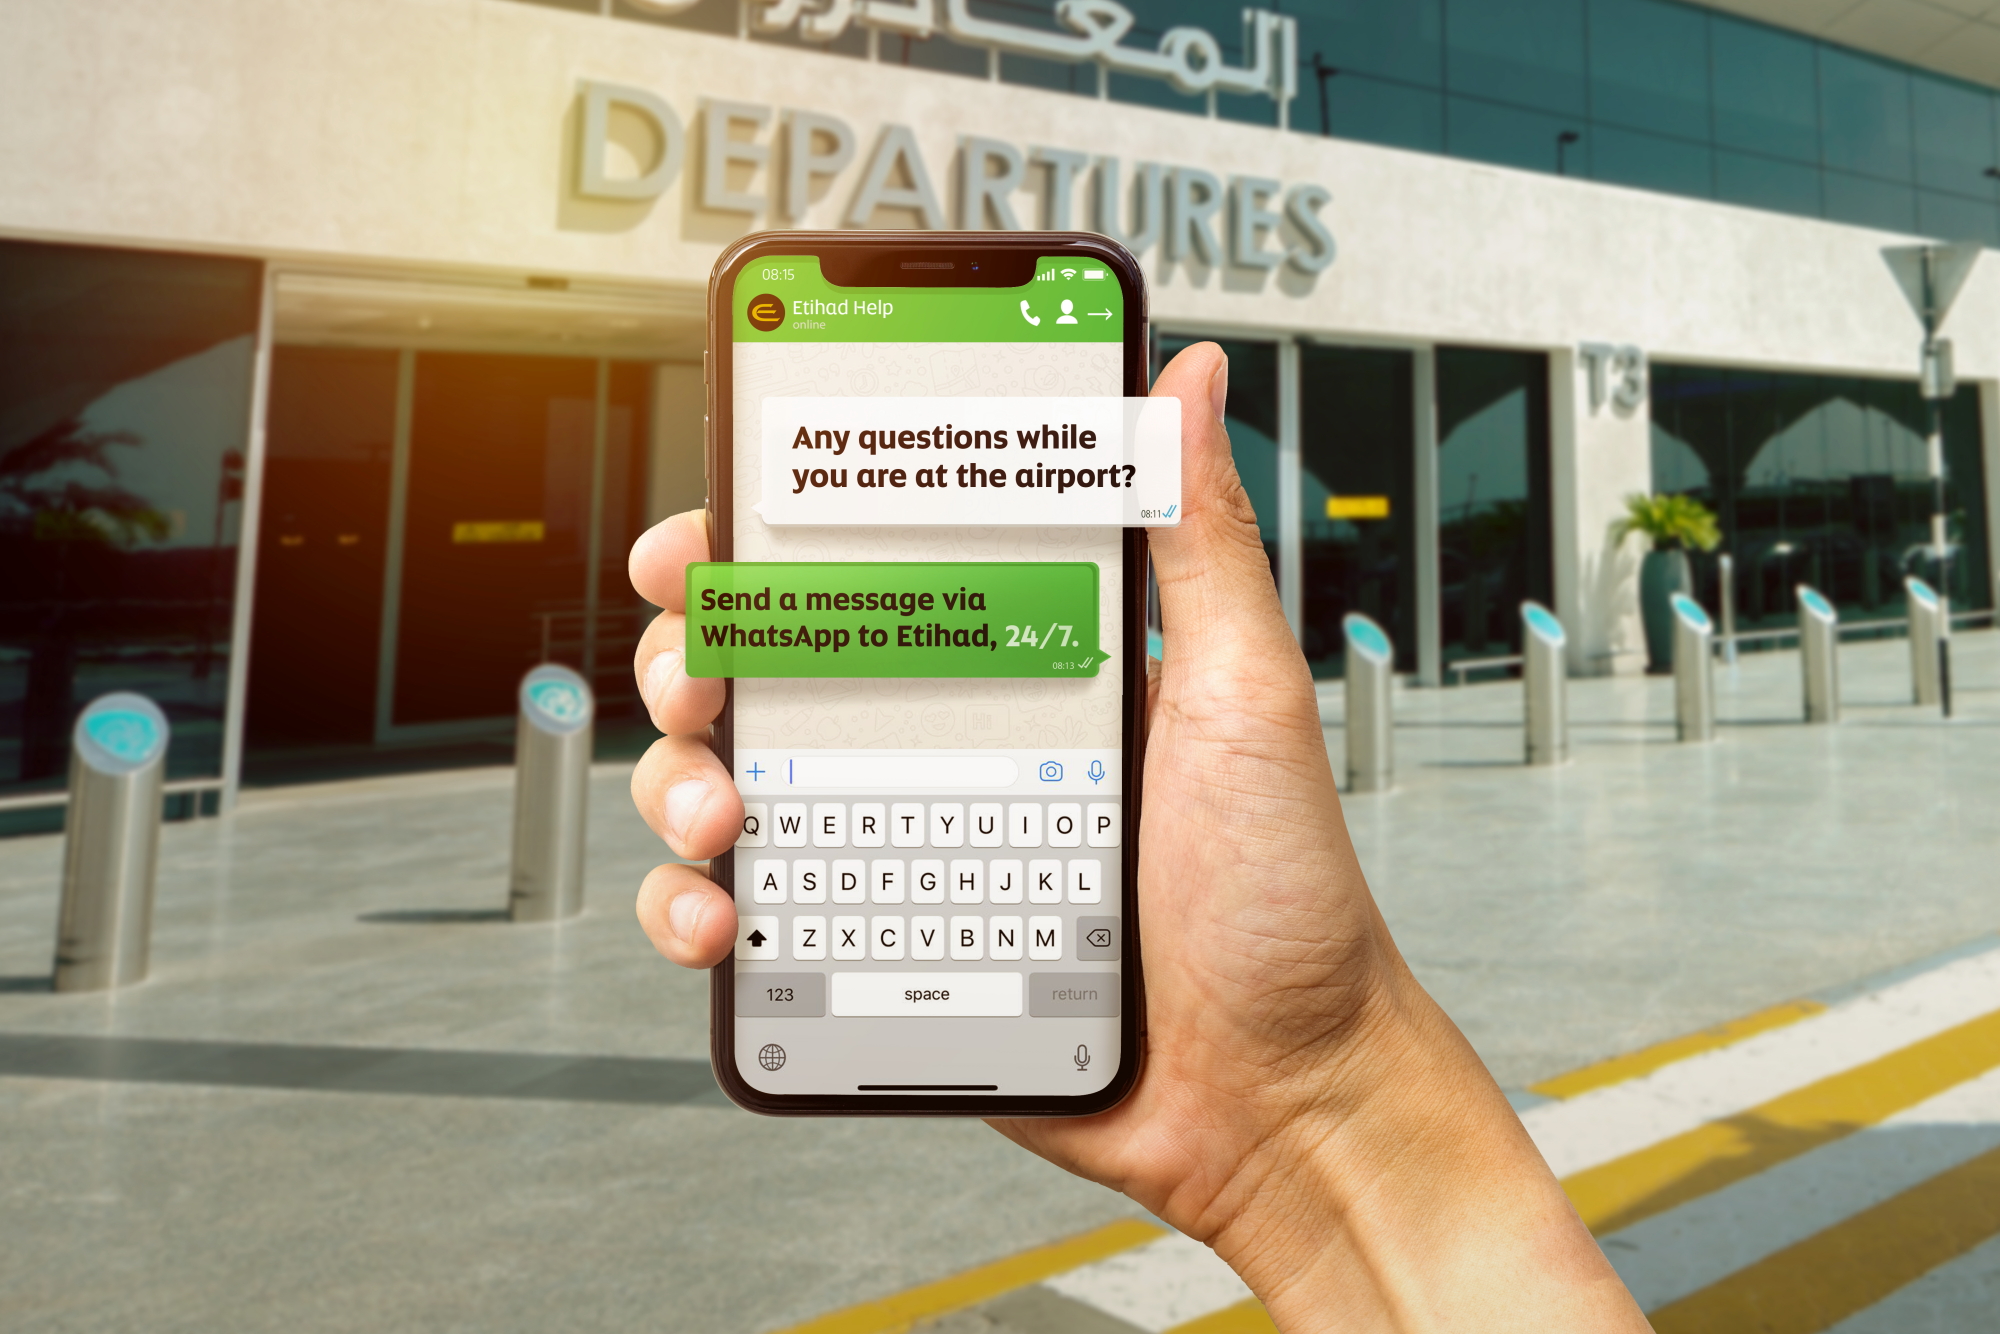 Etihad Airways has launched a WhatsApp Business solution, allowing passengers at Abu Dhabi International Airport to communicate instantly with the airline via the popular messaging app. Click to enlarge.